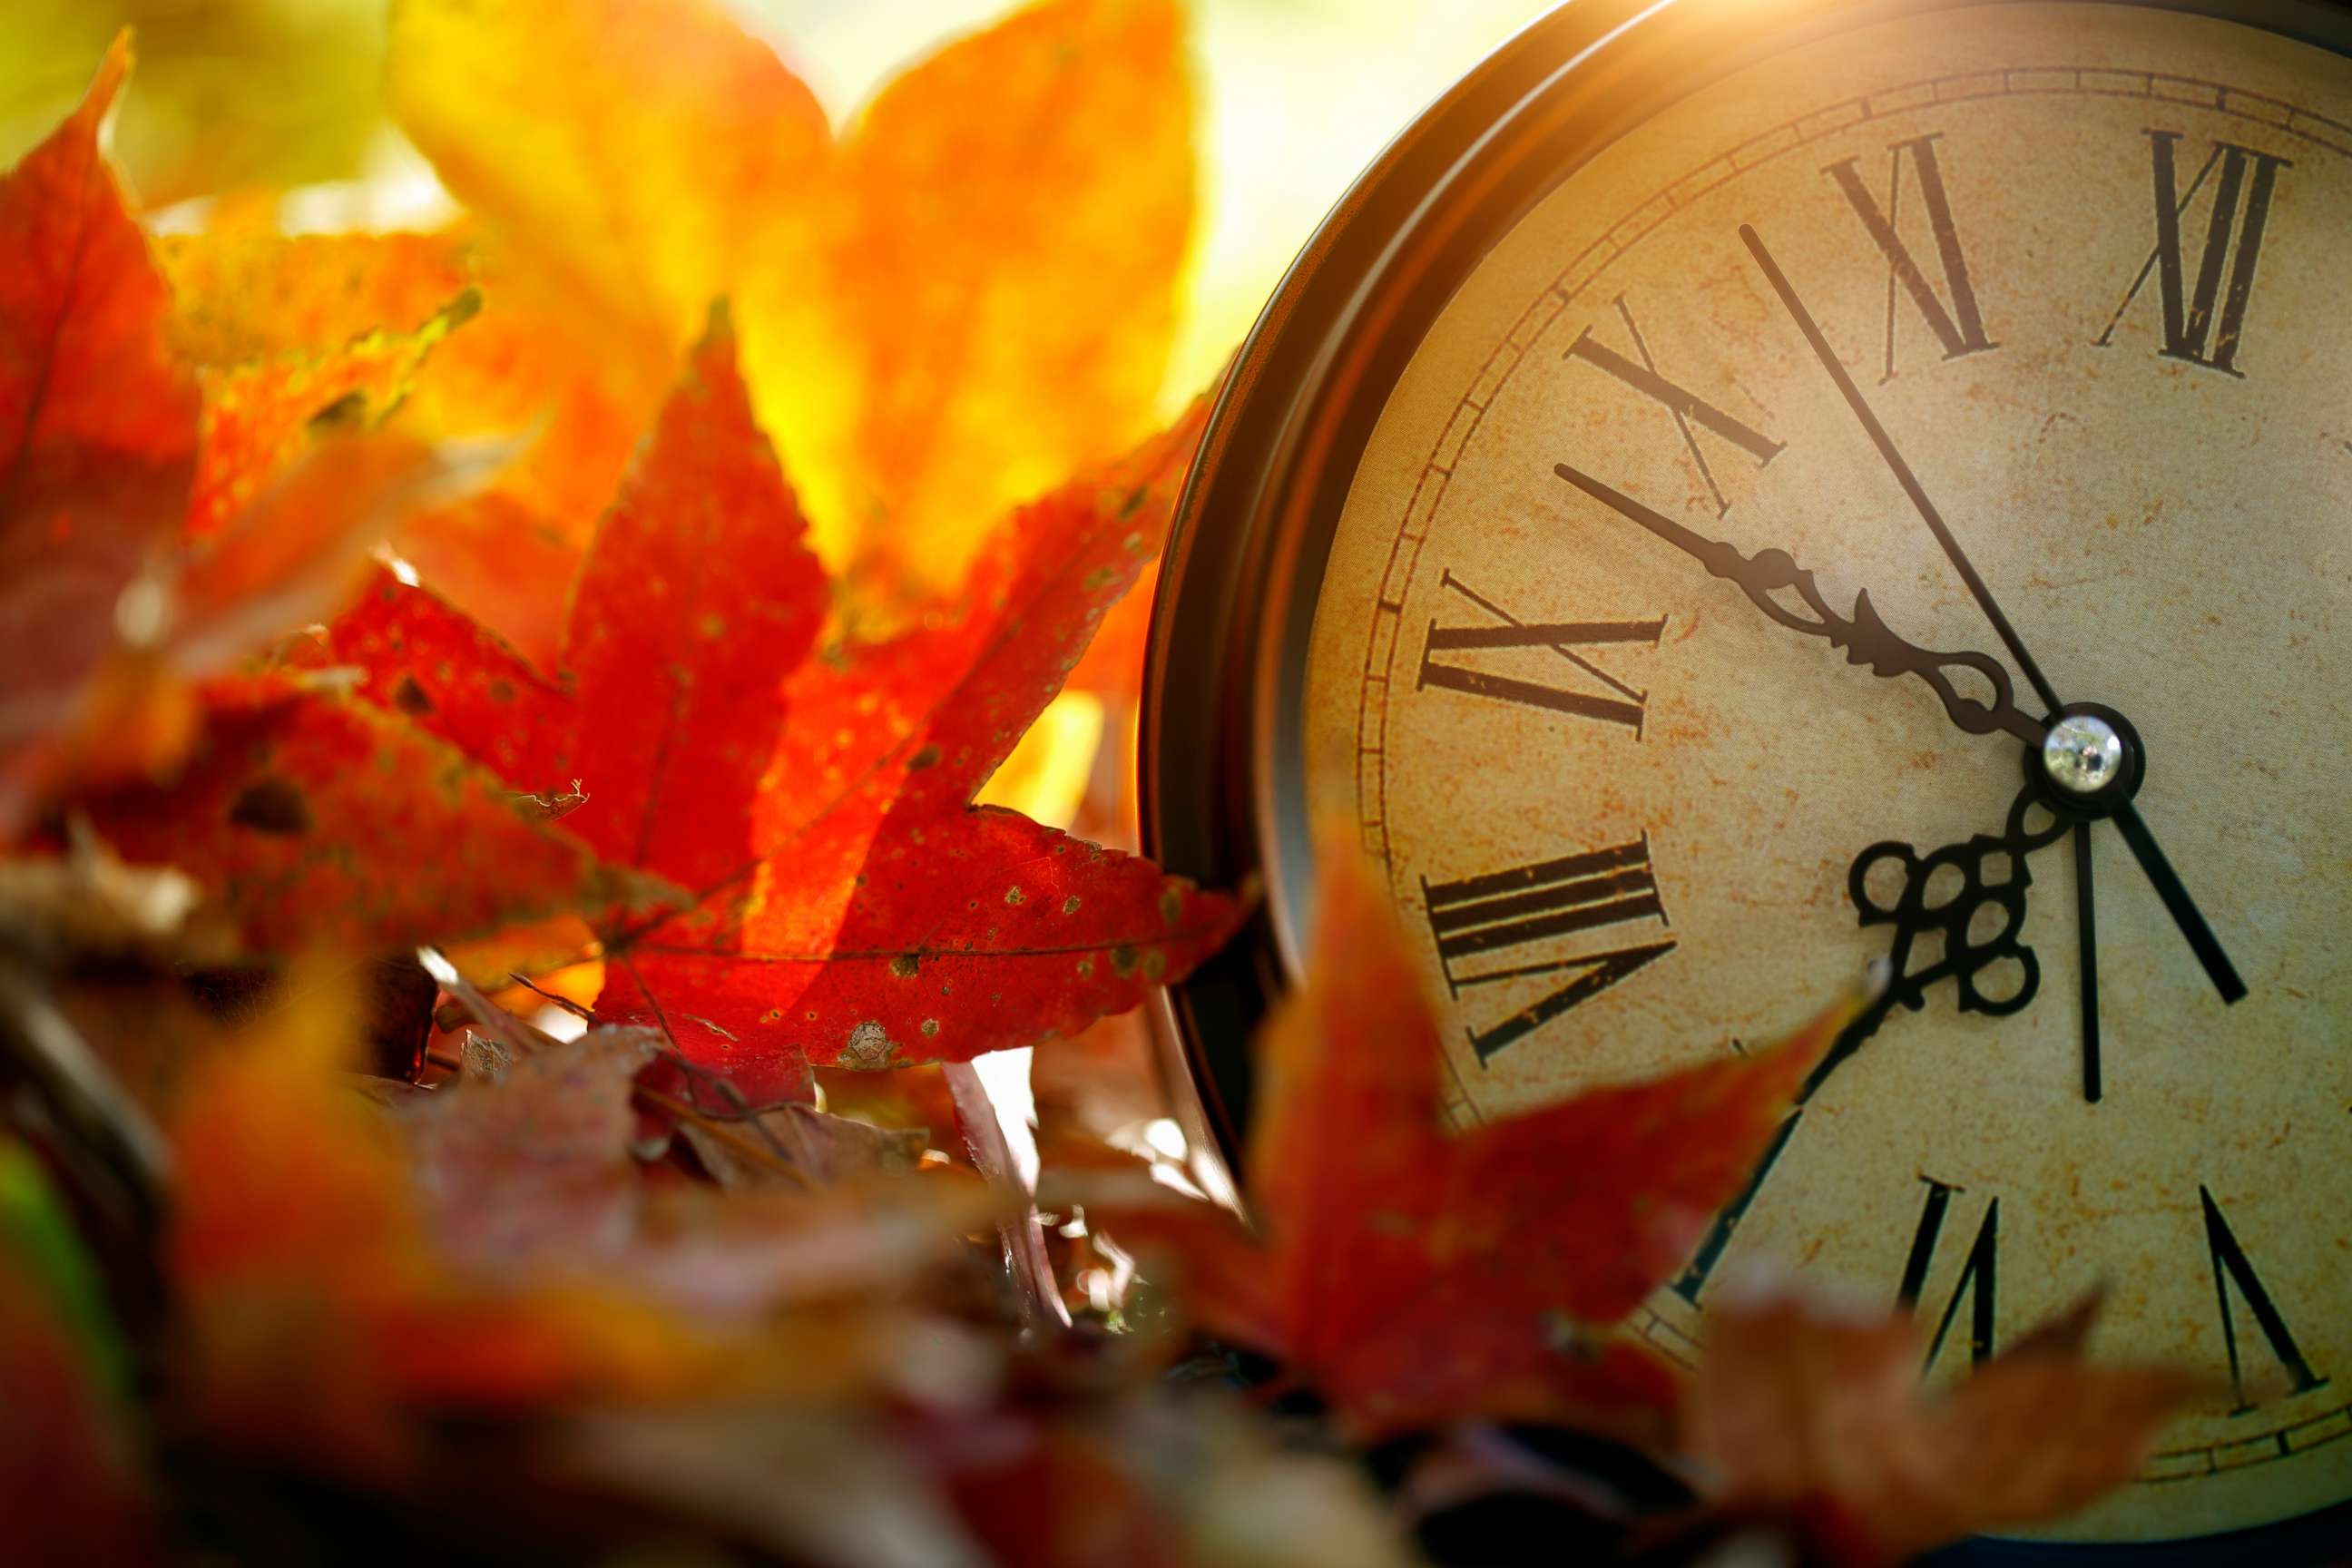 The end of daylight saving time can negatively affect your health